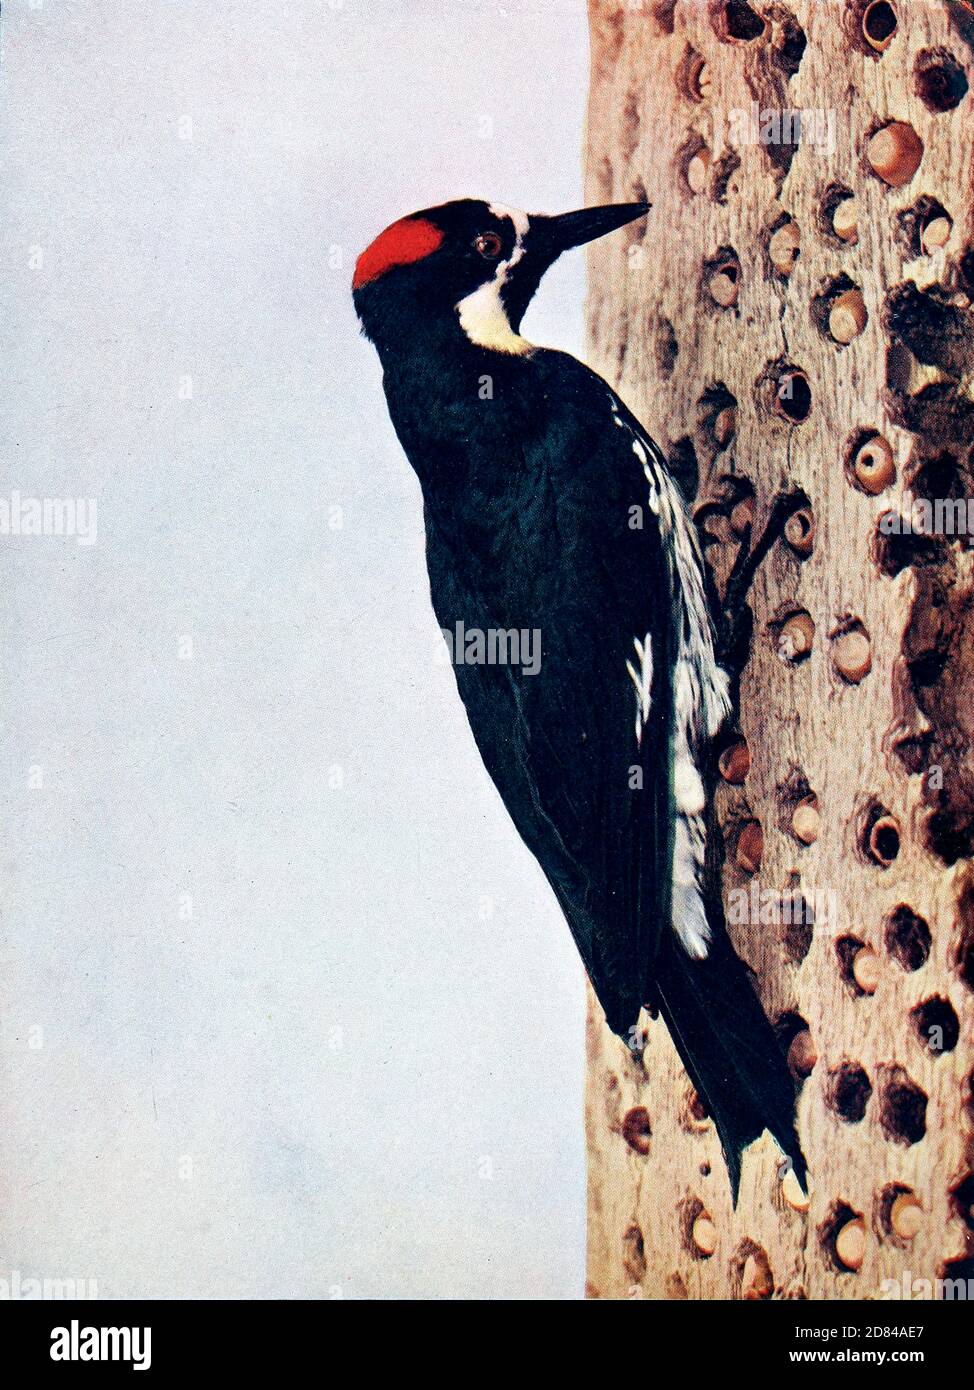 The acorn woodpecker or California woodpecker (Melanerpes formicivorus) is a medium-sized woodpecker, 21 cm (8.3 in) long, with an average weight of 85 g (3.0 oz). Acorn woodpeckers are larder hoarders. Breeding groups create a food store by drilling holes in a dead tree, and stuffing acorns into them. The group defends the tree against potential robbers. As well as acorns, they also eat insects, fruit, seeds and sometimes tree sap. From Birds : illustrated by color photography : a monthly serial. Knowledge of Bird-life Vol 1 No 4 April 1897 Stock Photo